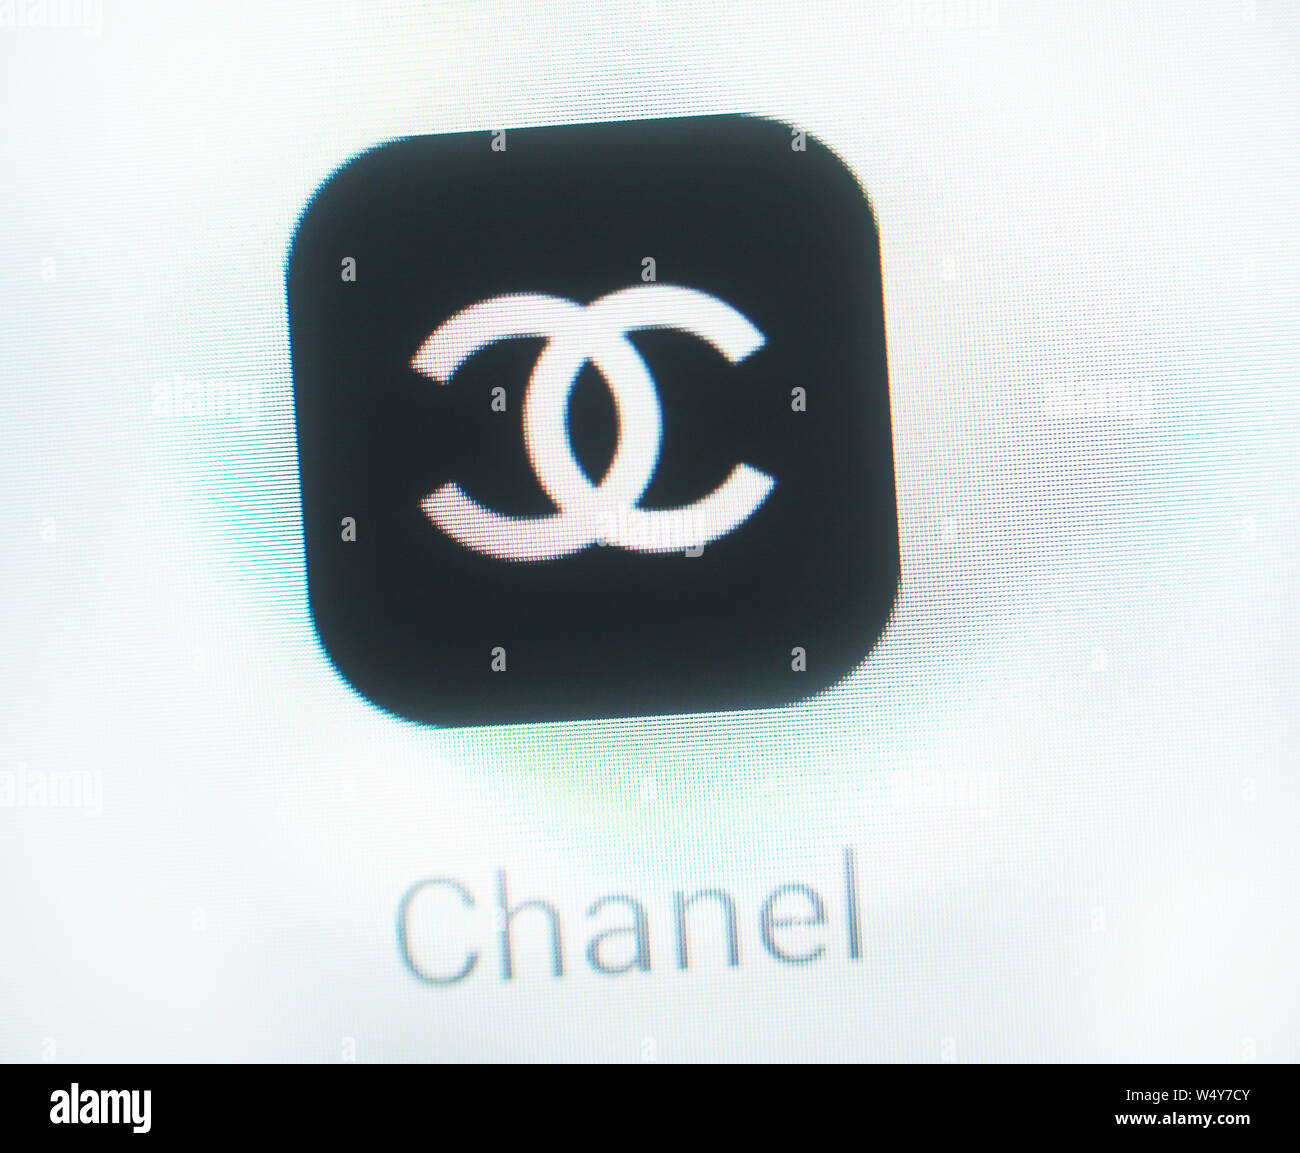 Chanel S.A. company application icon on computer display Stock